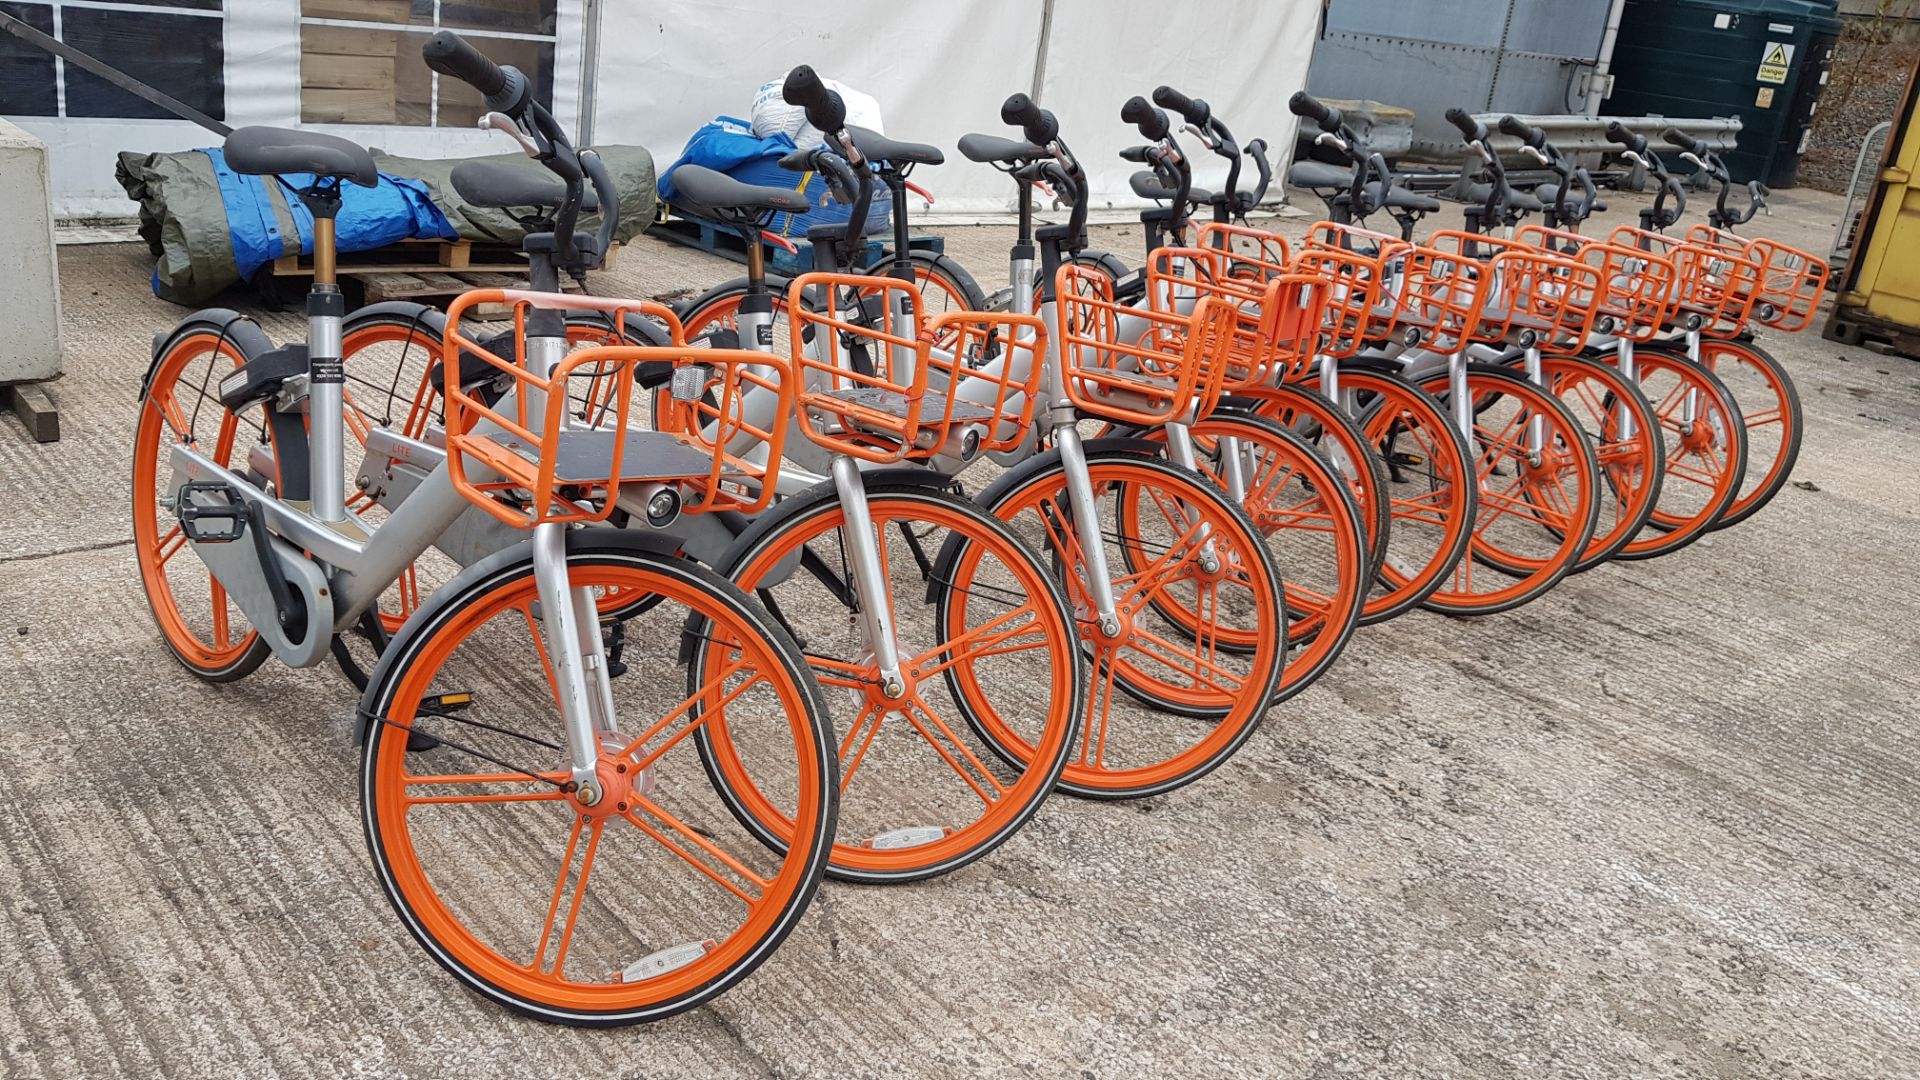 10 X ORANGE & SILVER CITY CAMPING BICYCLES - TRADE LOT - ROBUST ALUMINIUM 19 X 48 FRAME, SOLID